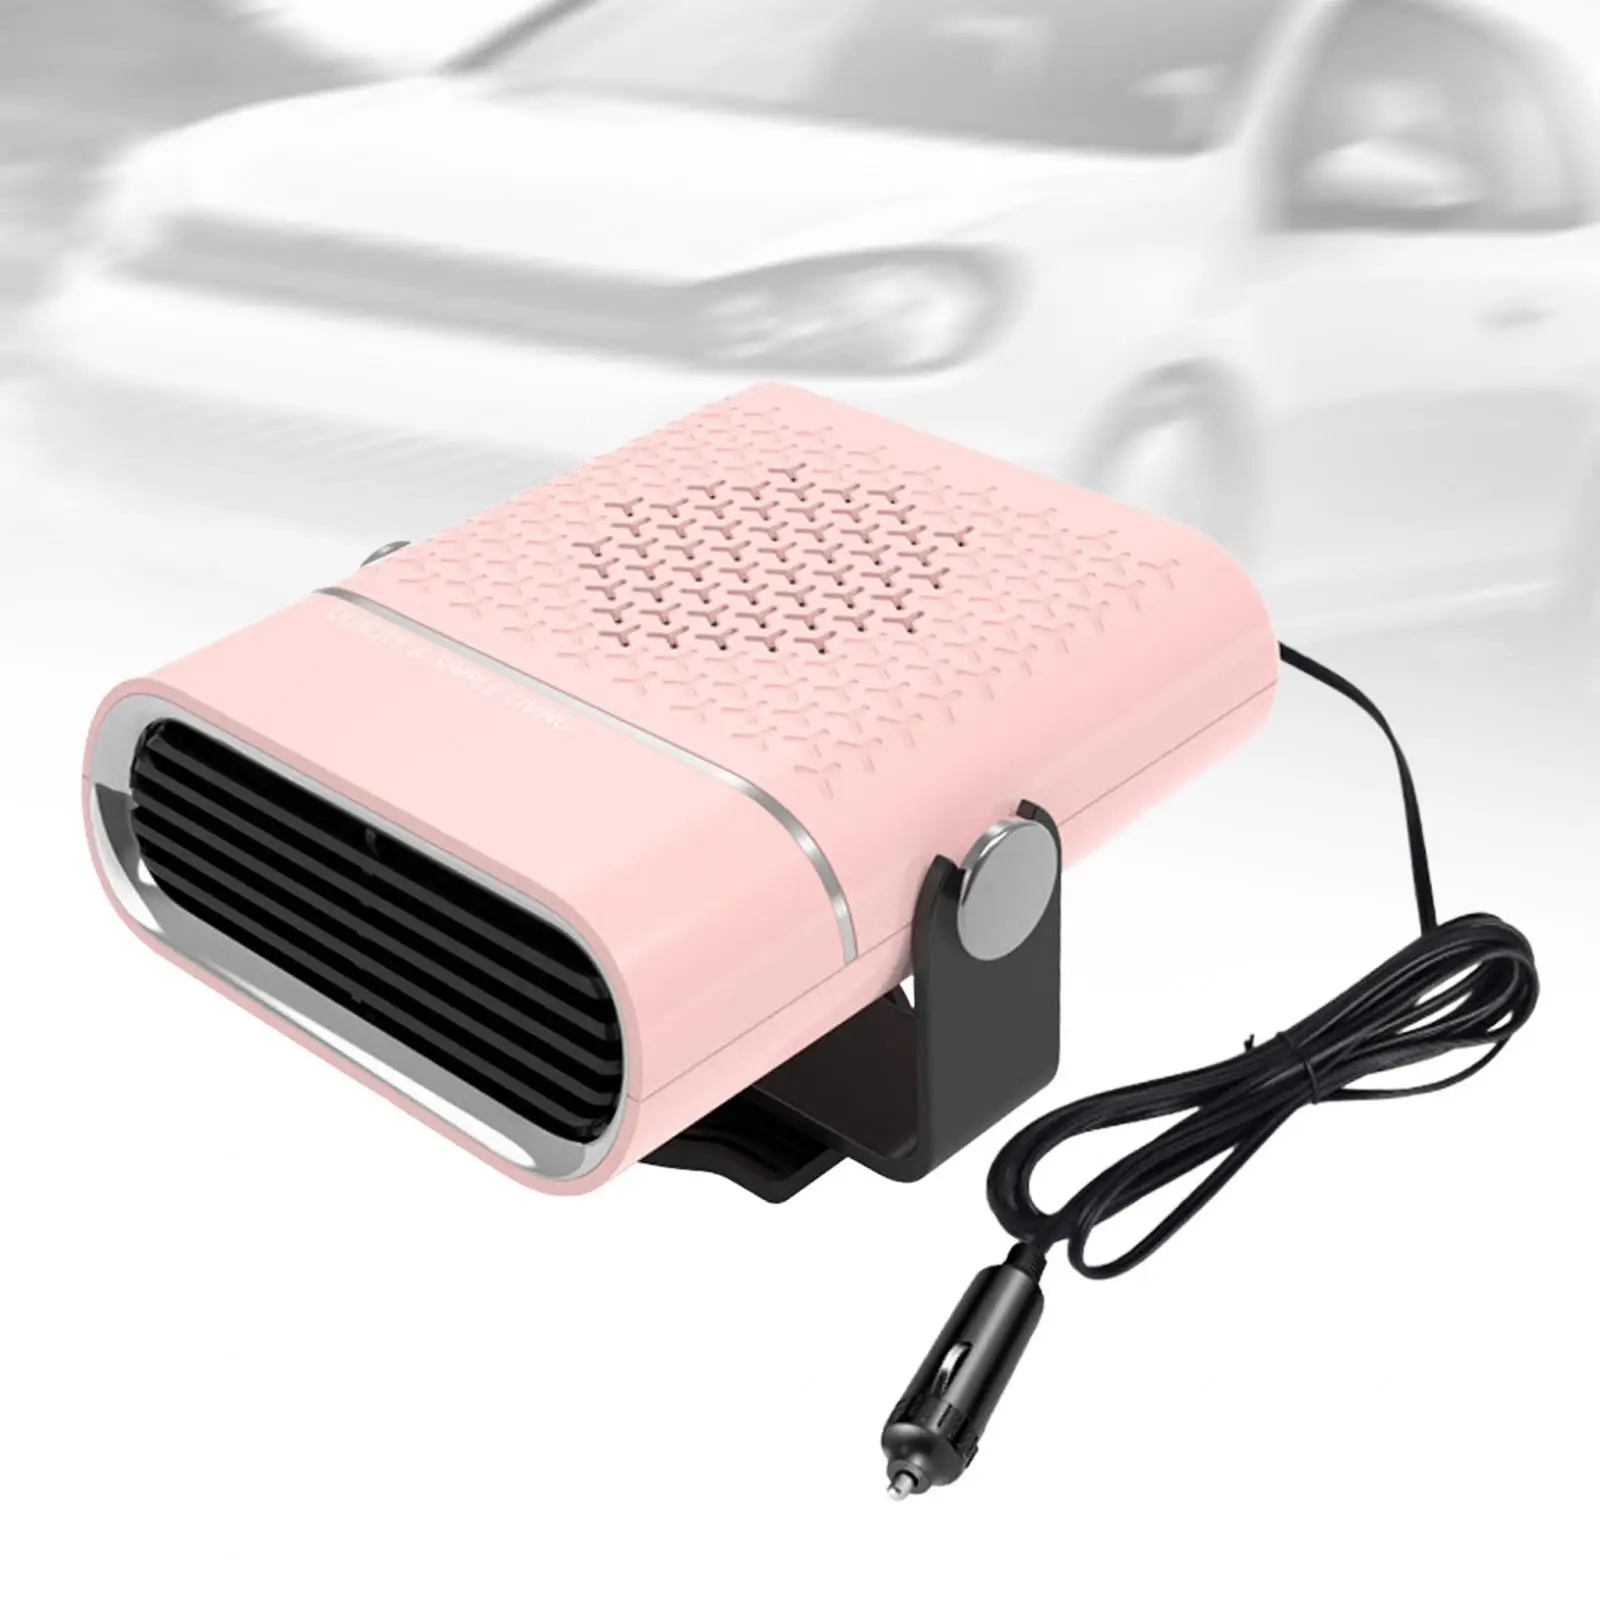 Car Heater 24V Compact Heating and Cooling 260W Car Heater and Defroster